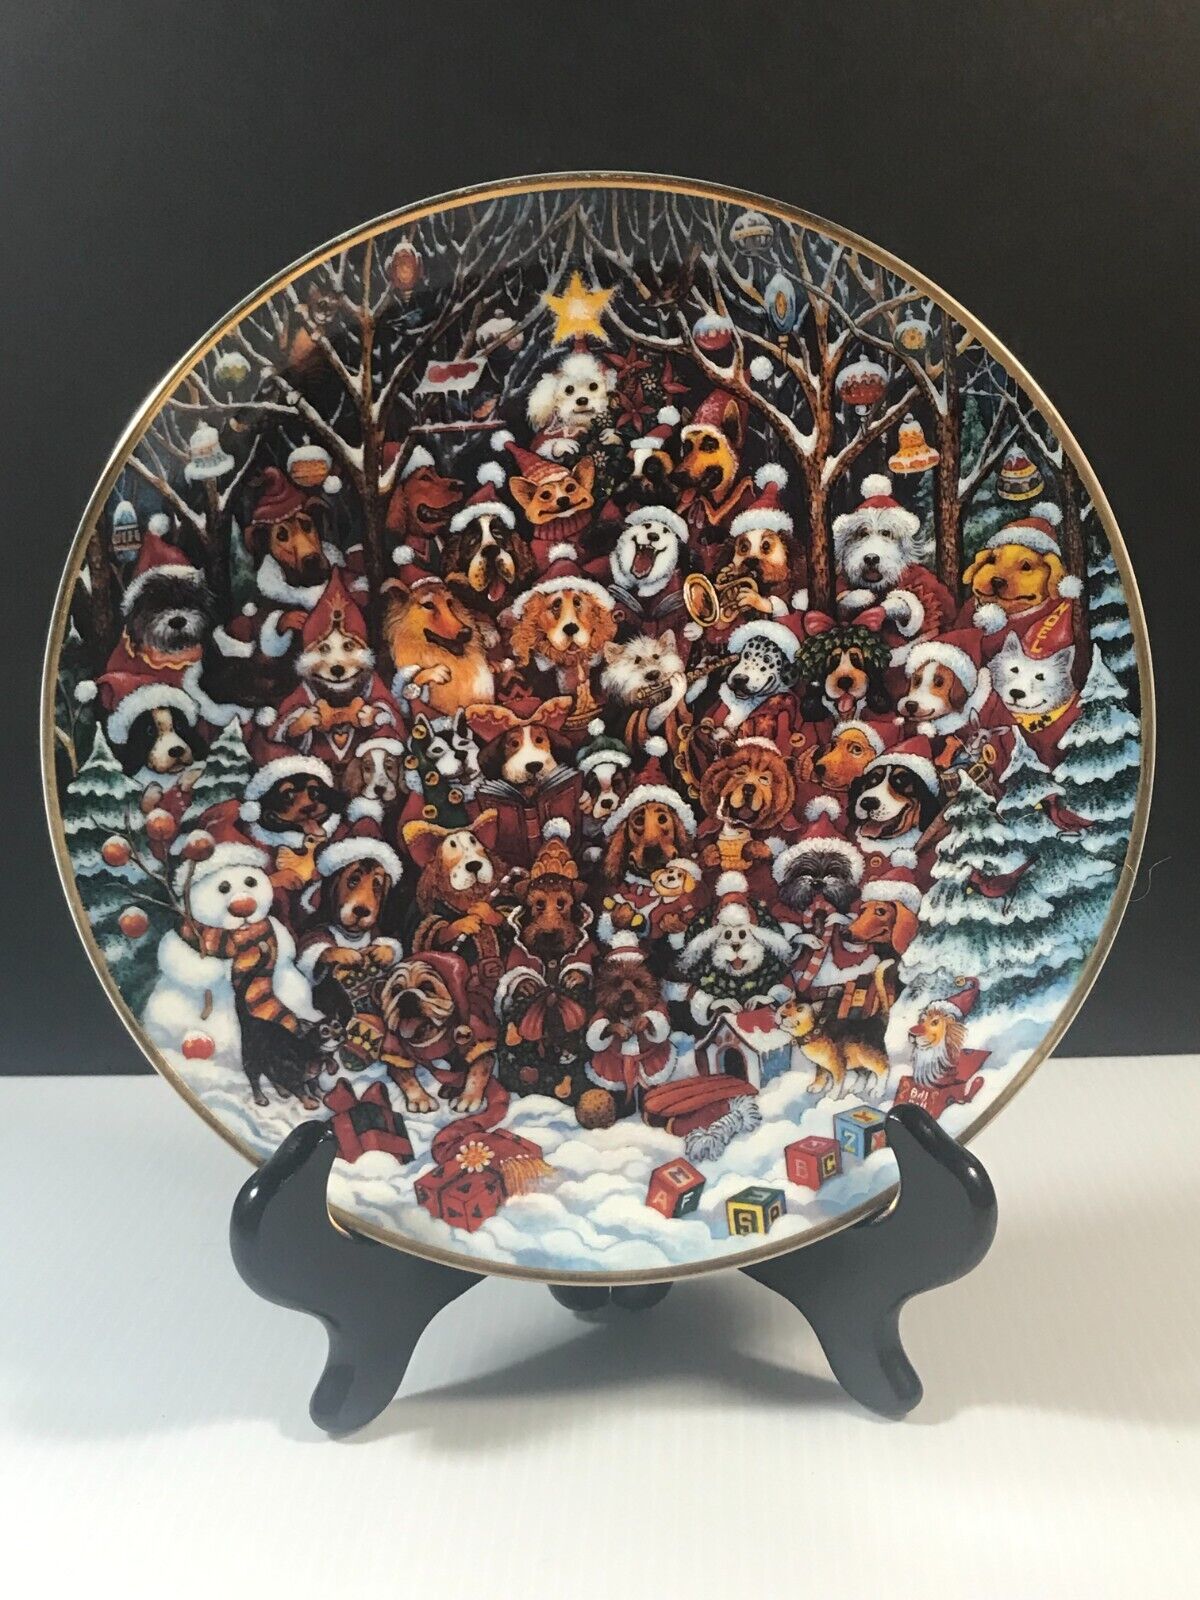 SANTA PAWS by Bill Bell Dogs Limited Edition Plate